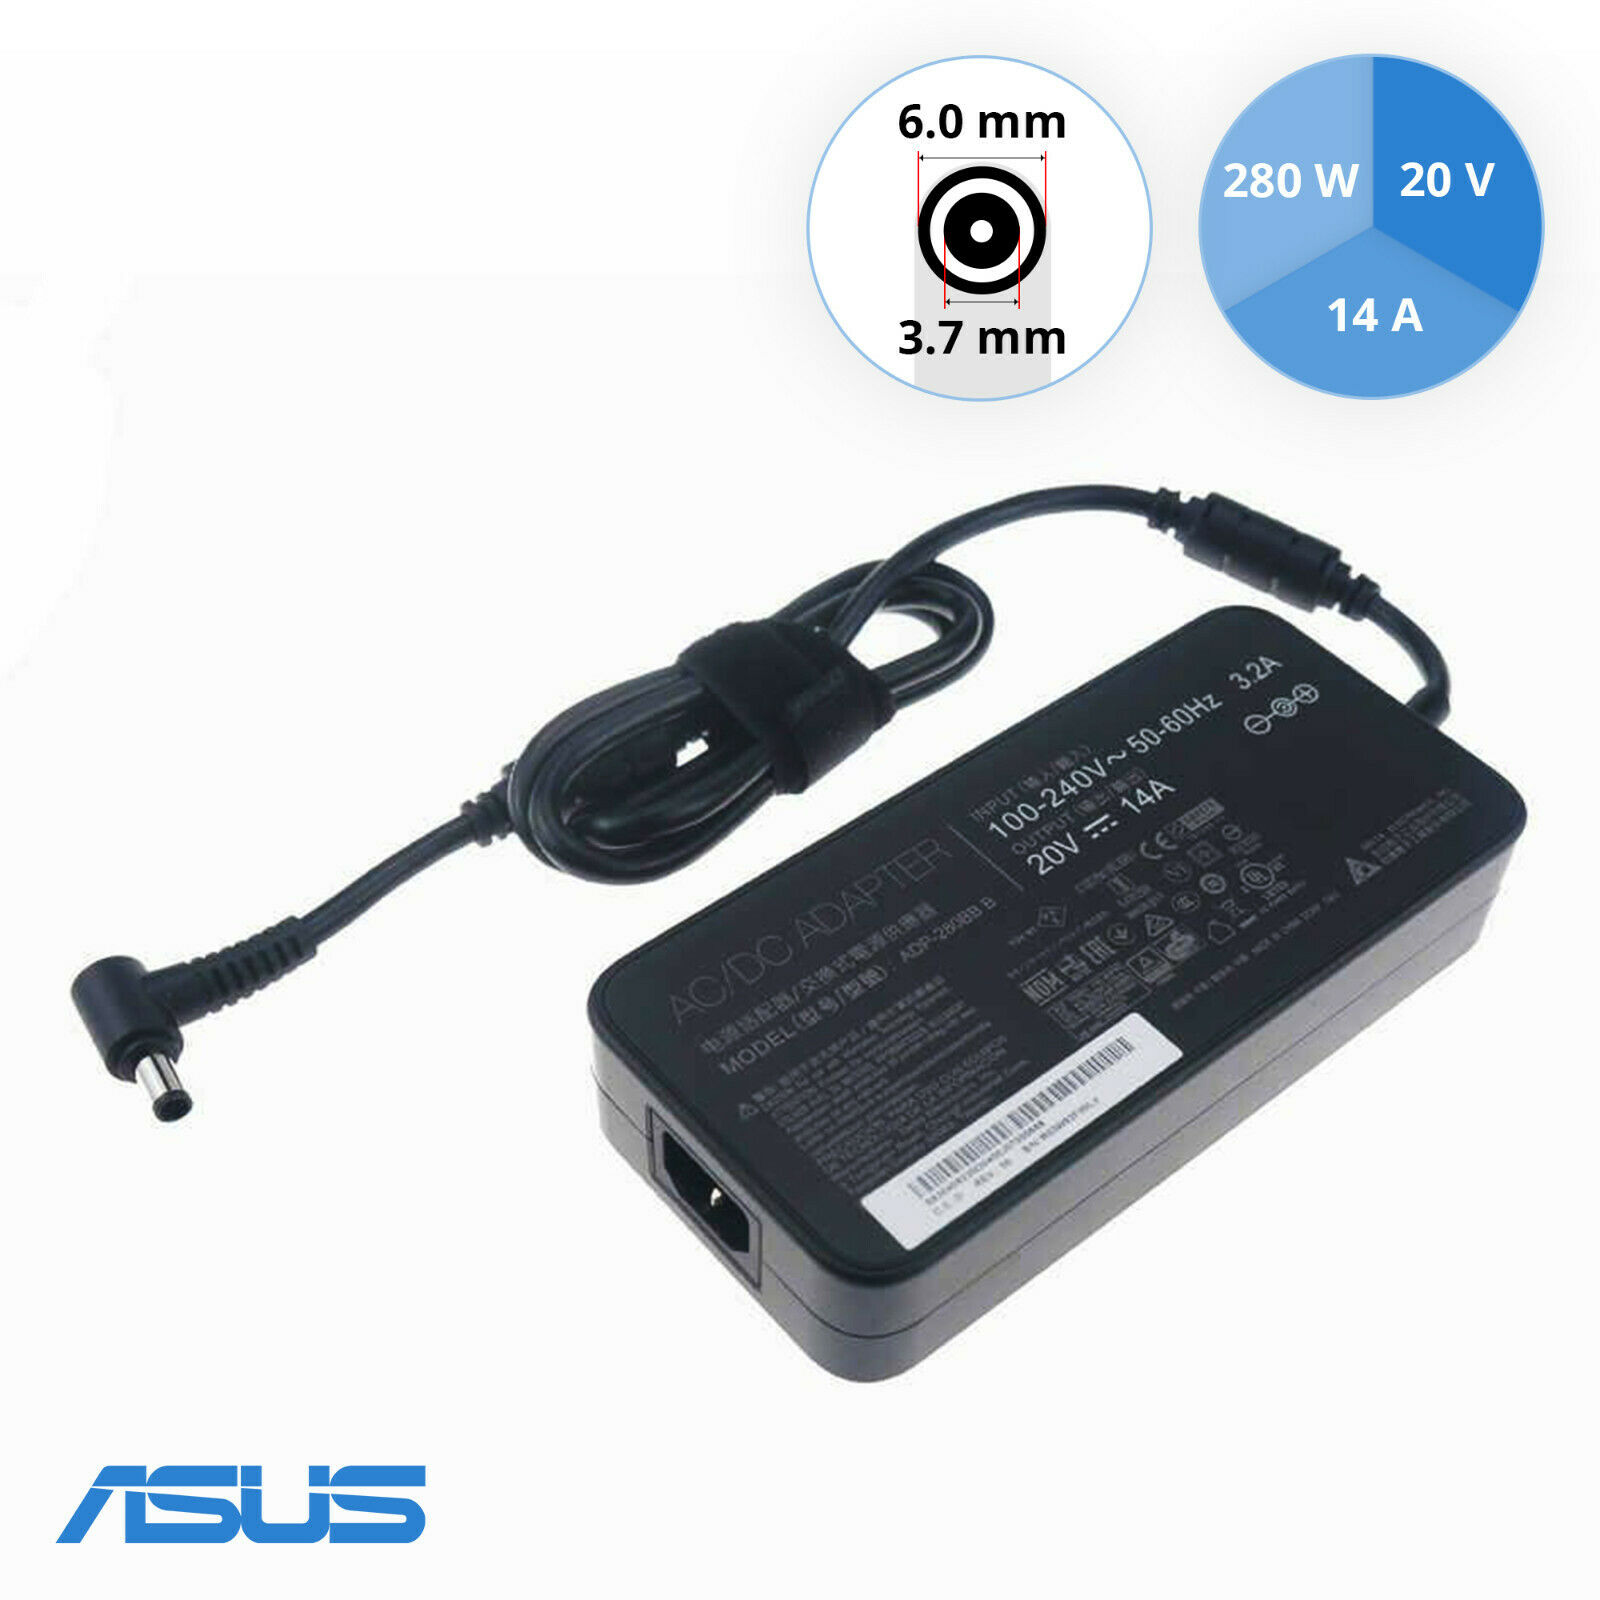 Original Asus ADP-280BB 20V 14A 280W AC Power Adapter ROG 6mmx3.7mm Compatible Brand: For ASUS Type: Power Adapter M - Click Image to Close